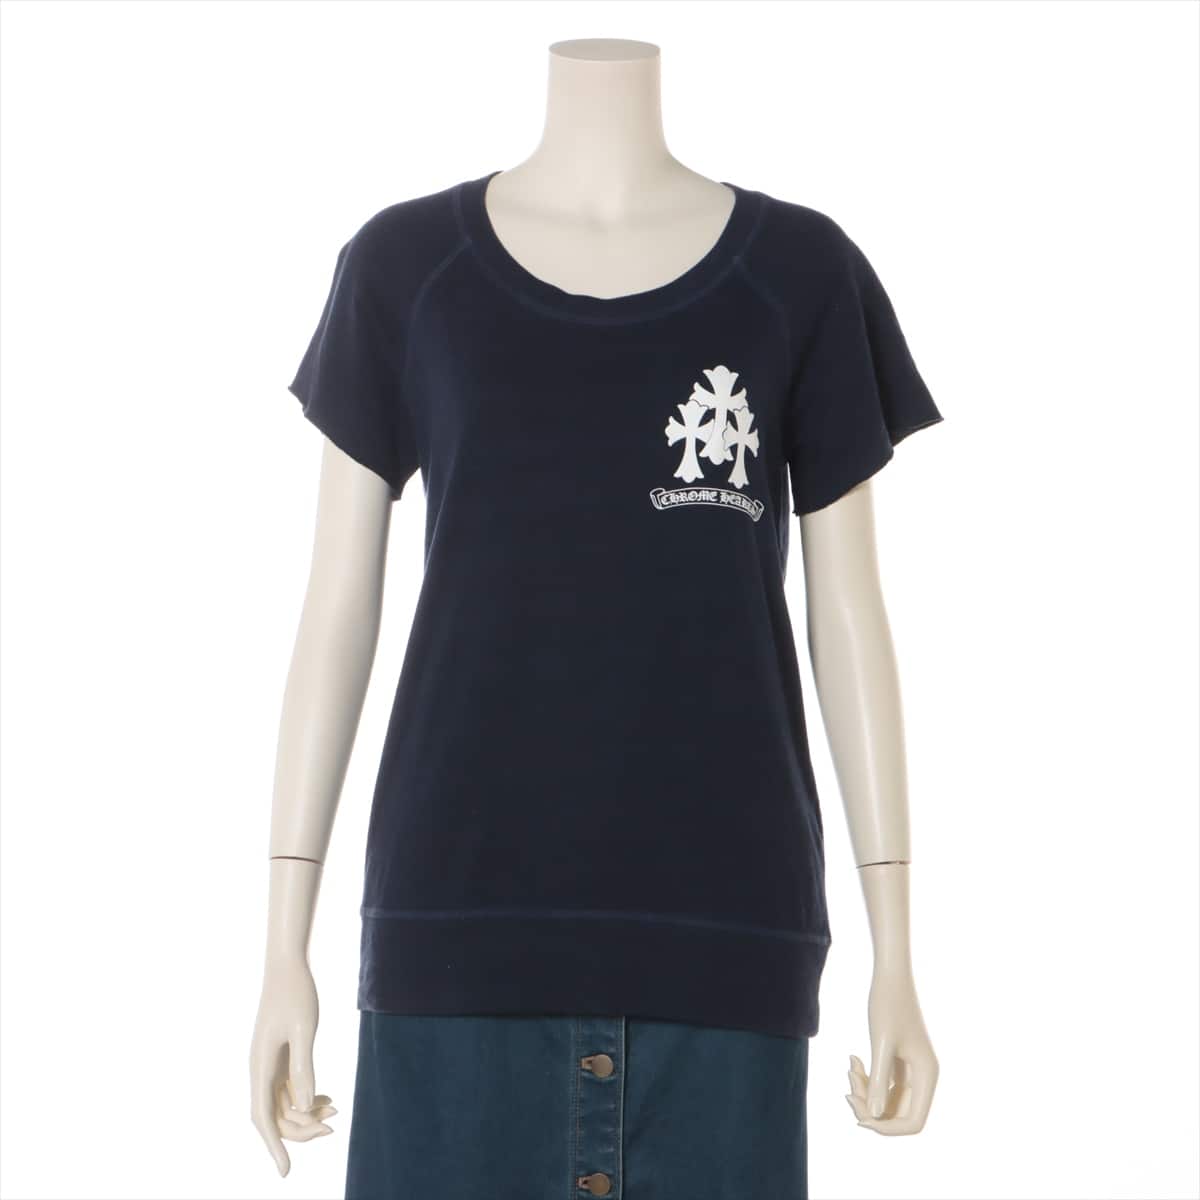 Chrome Hearts Cut and sew Cotton & polyester S Navy blue striped heart print short sleeve sweatshirt